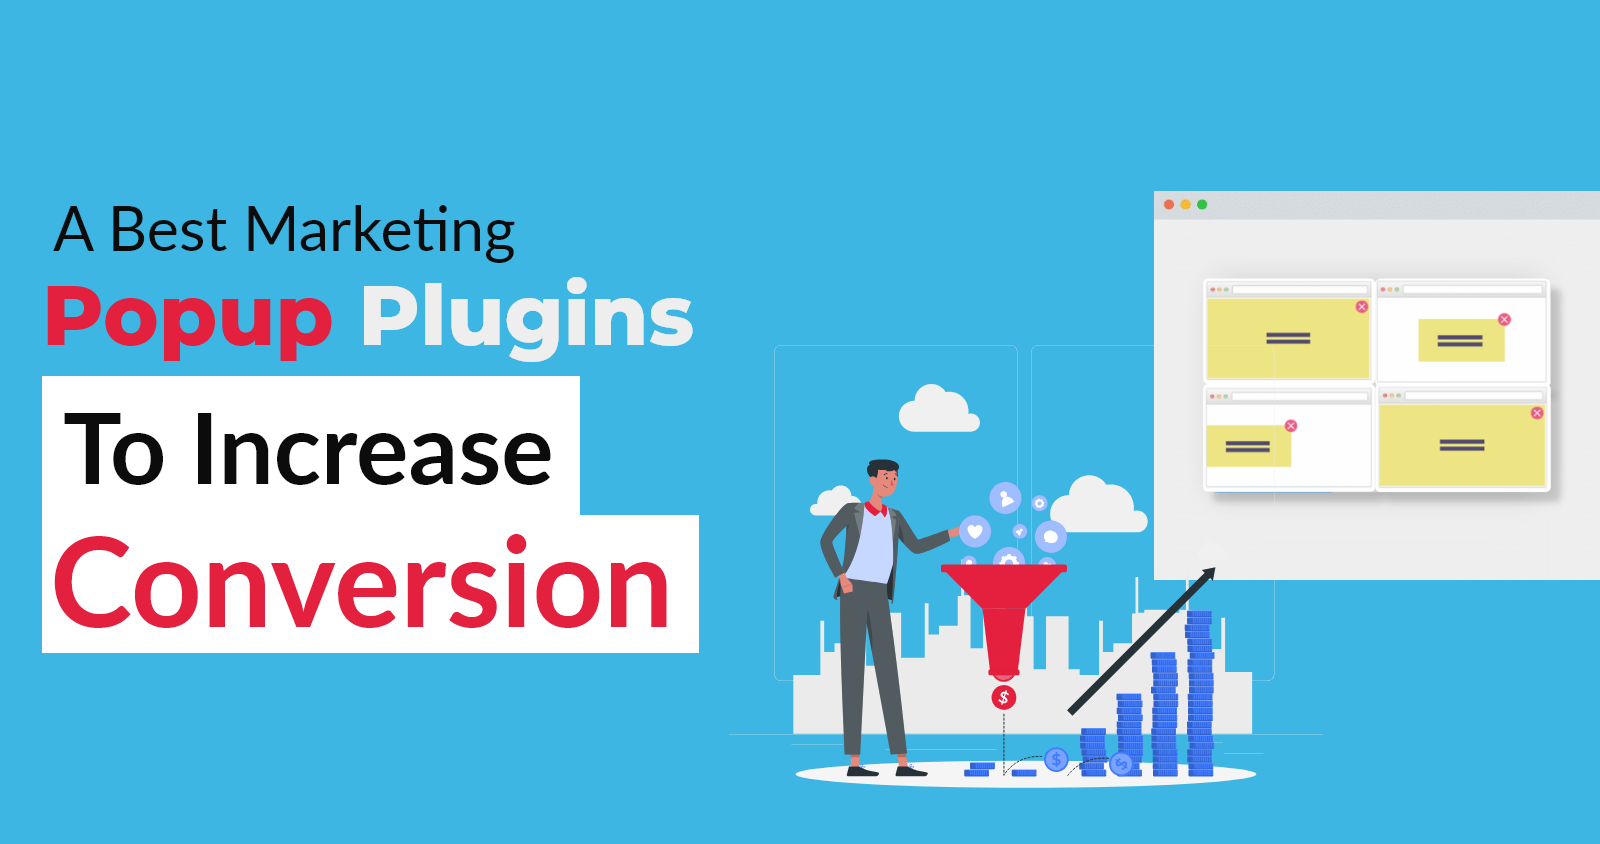 The Best Marketing Popup Plugin to Increase Conversion